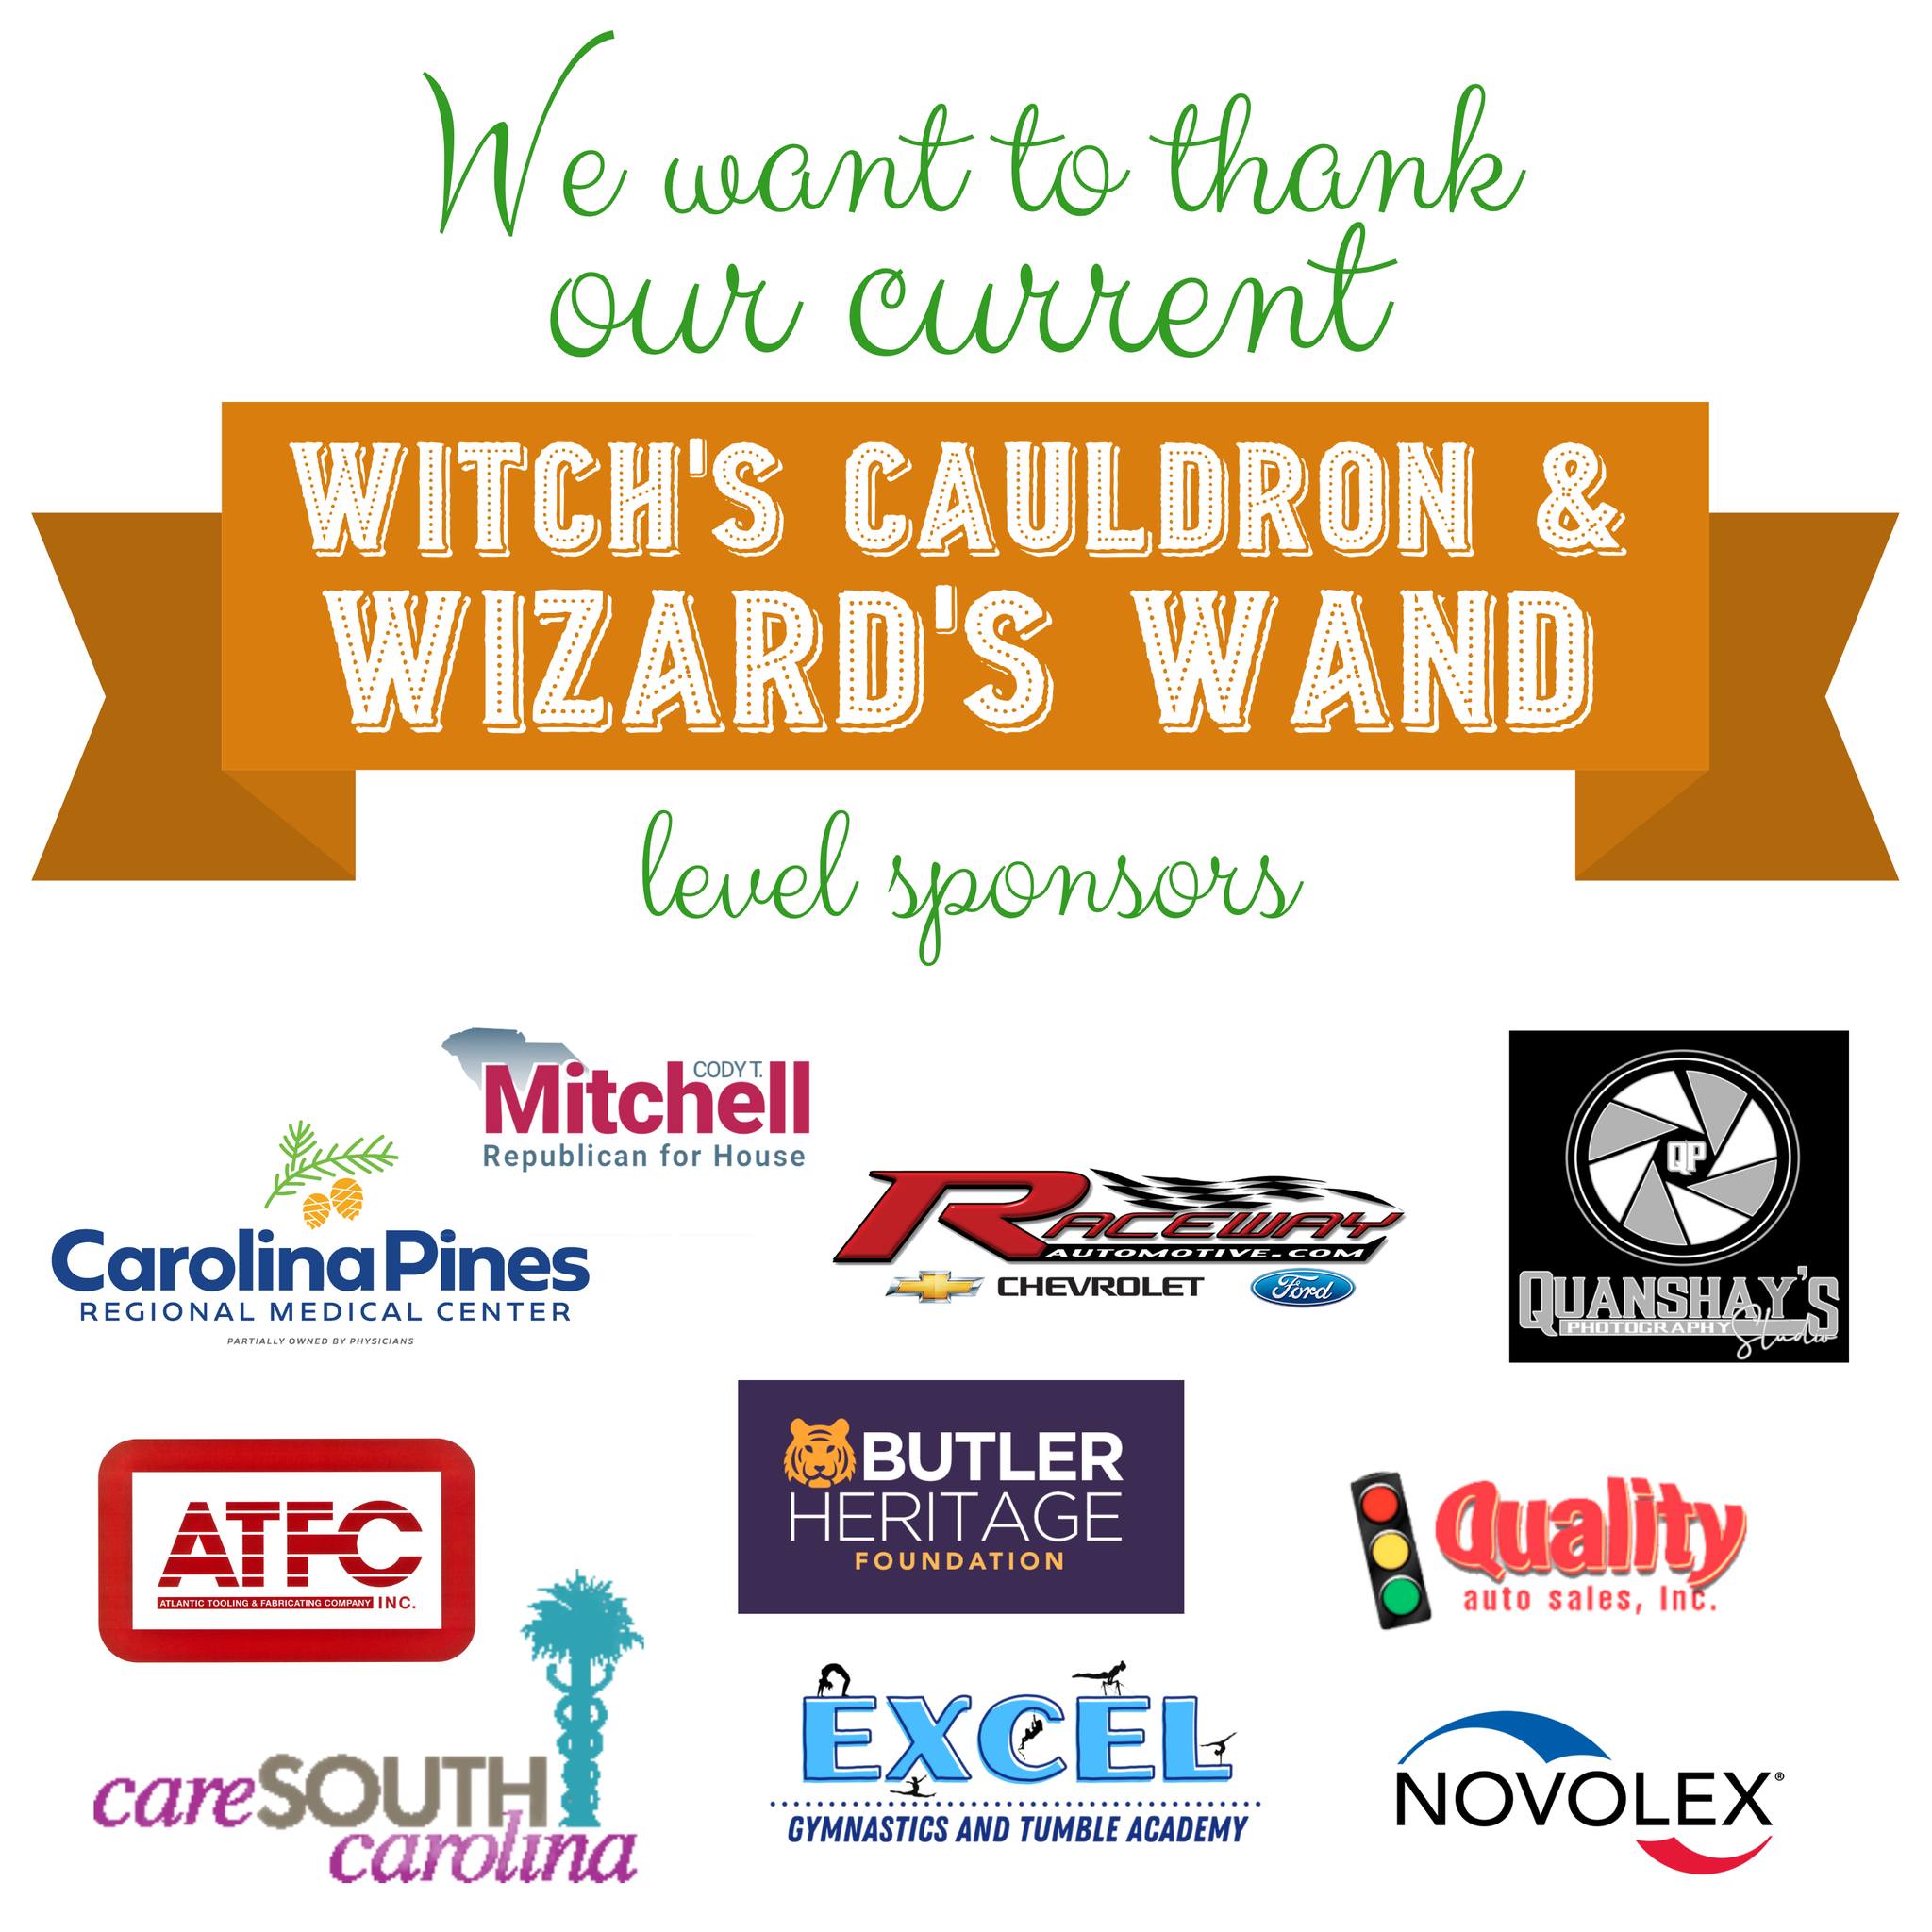 Thank you to our Wizard's Wand and Witch's Cauldron Sponsors